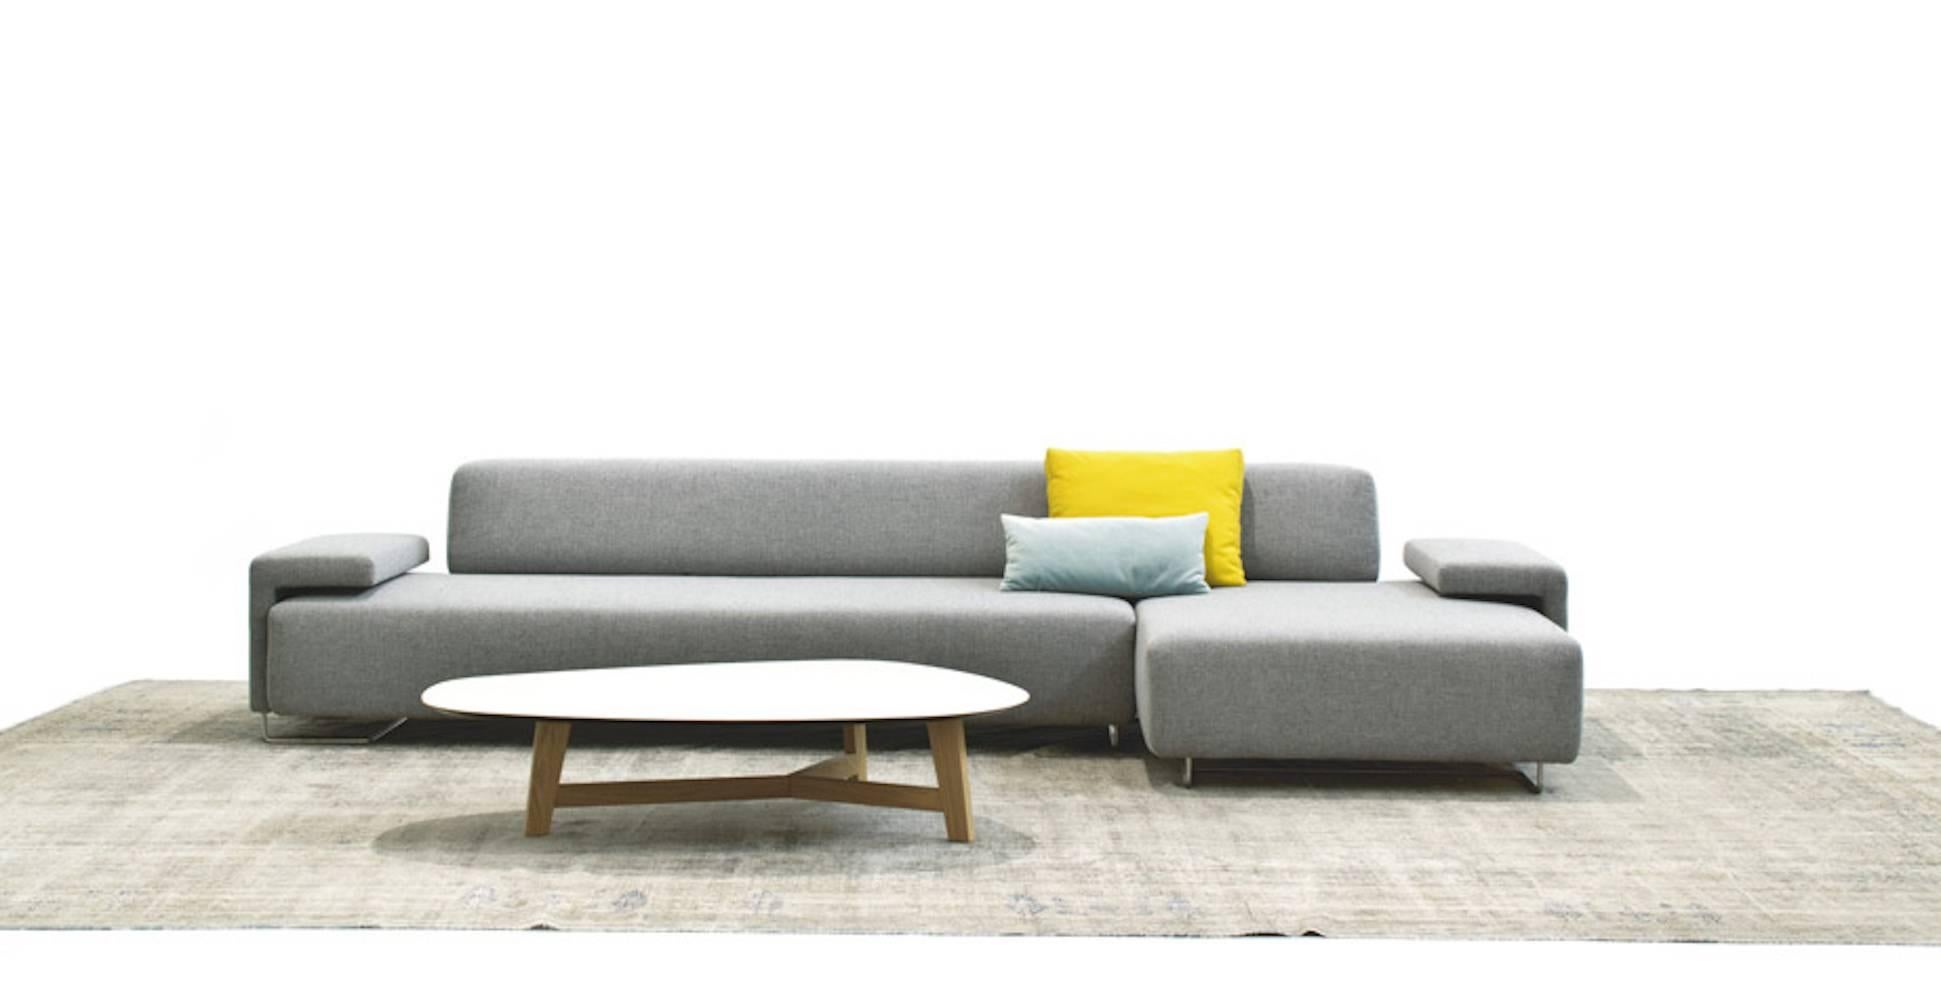 Lowland sectional sofa in right or left configuration in grey Steelcut Trio 133 Fabric 

A sofa, a changing landscape made from elemental shapes which dynamically interact with one another. Patricia Urquiola deconstructs the Classic sofa, and